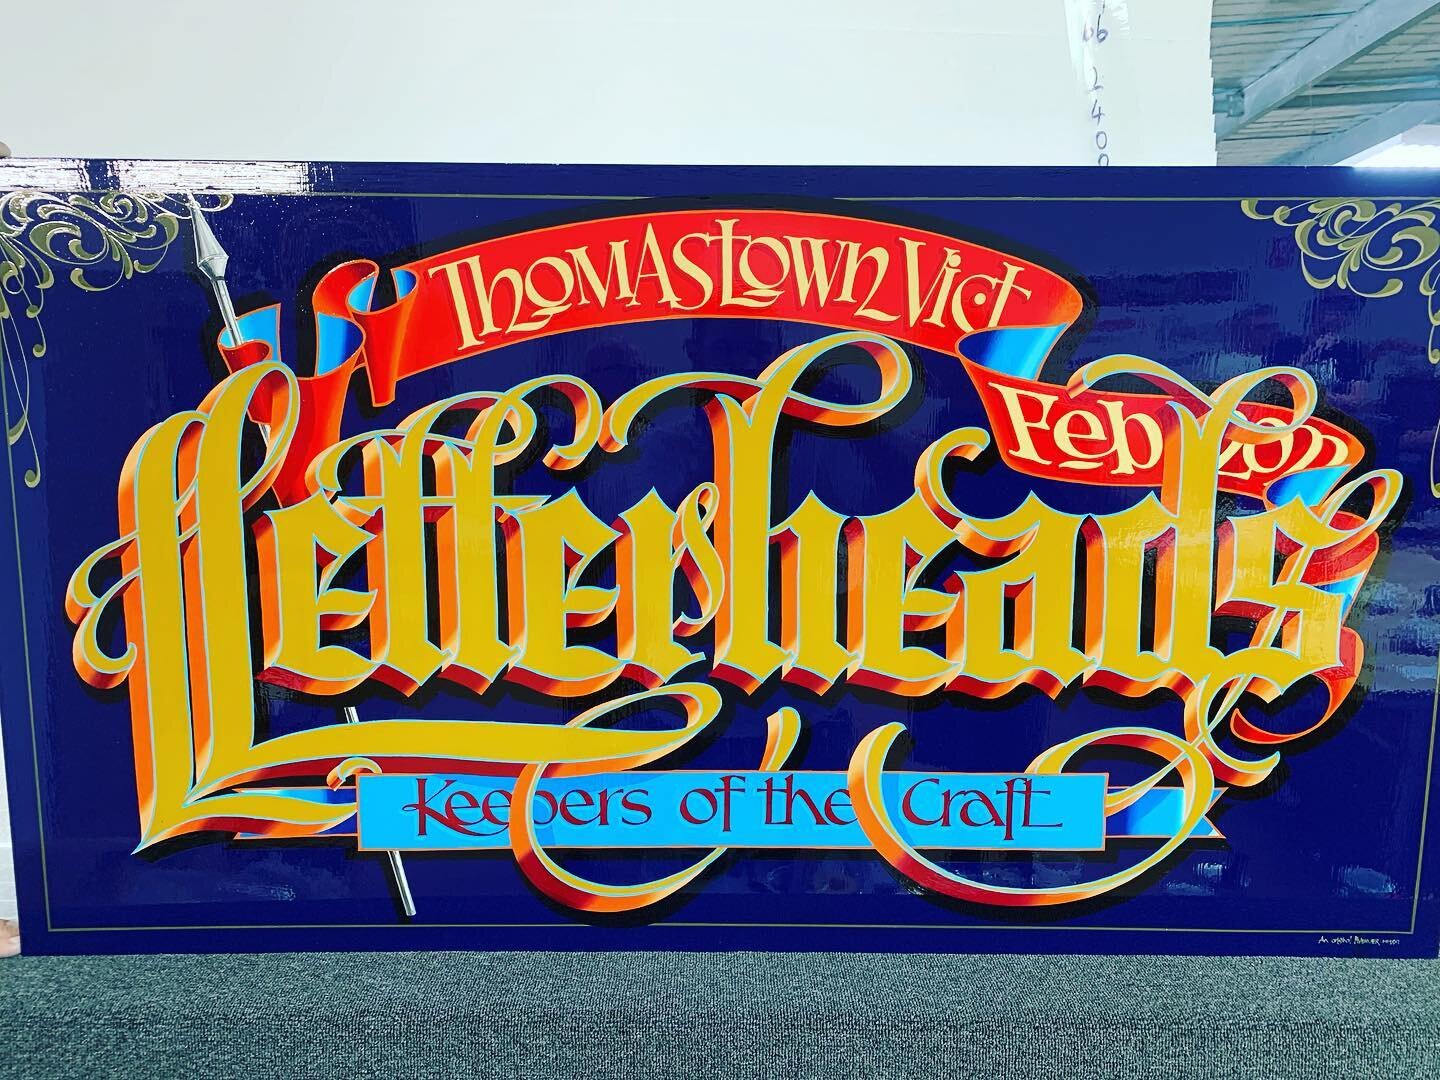 Another Amazing sign of letterheads from @aknightofthebrush